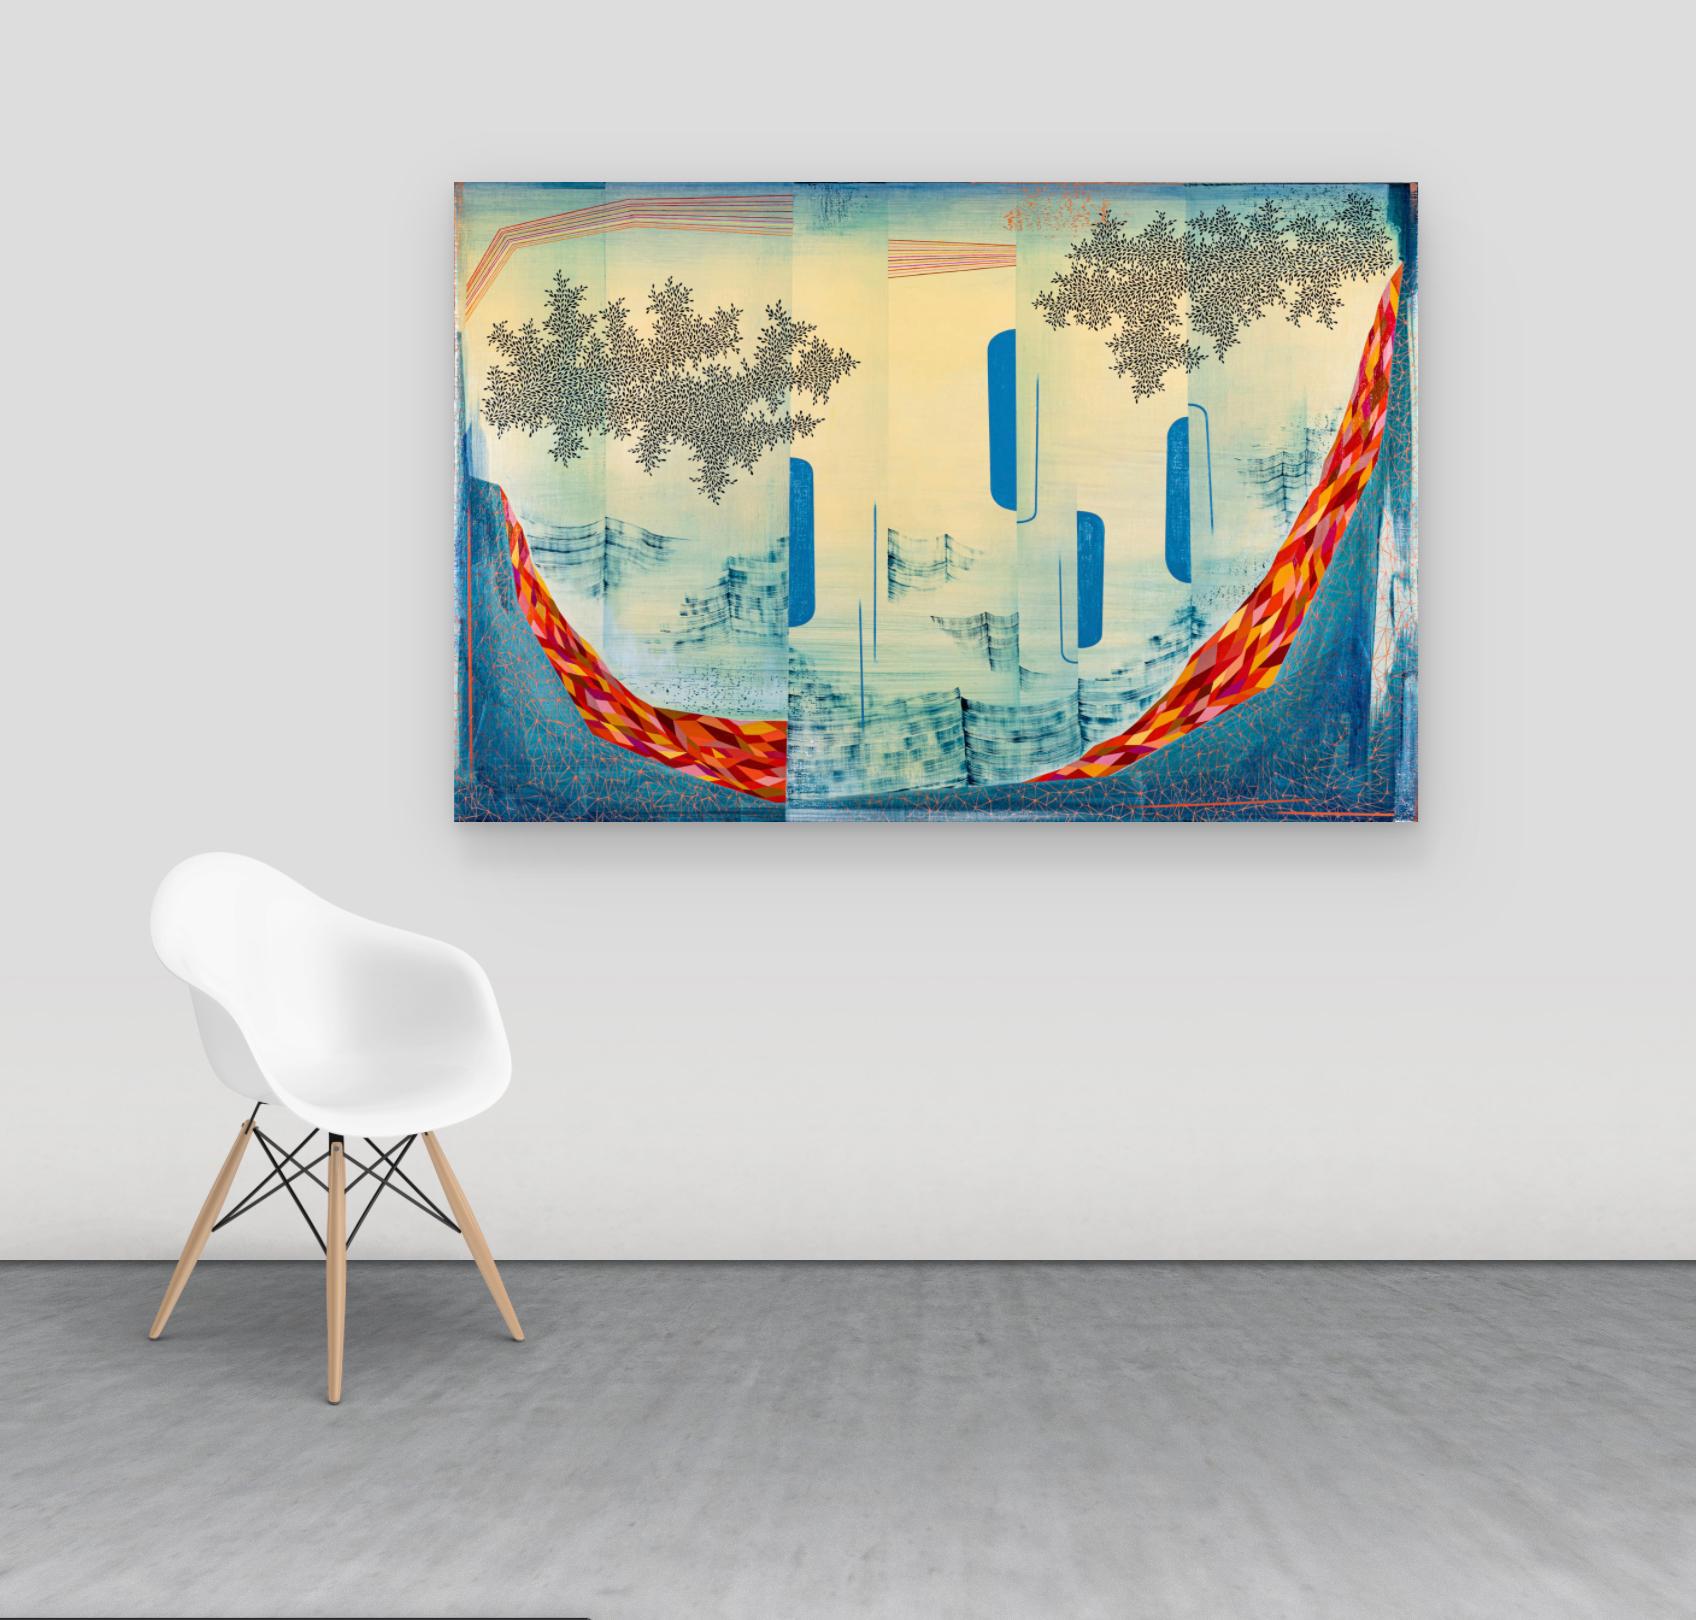 Fire Water Sky, Large Horizontal Abstract Landscape in Dark Red, Blue, Yellow - Contemporary Painting by Gabe Brown